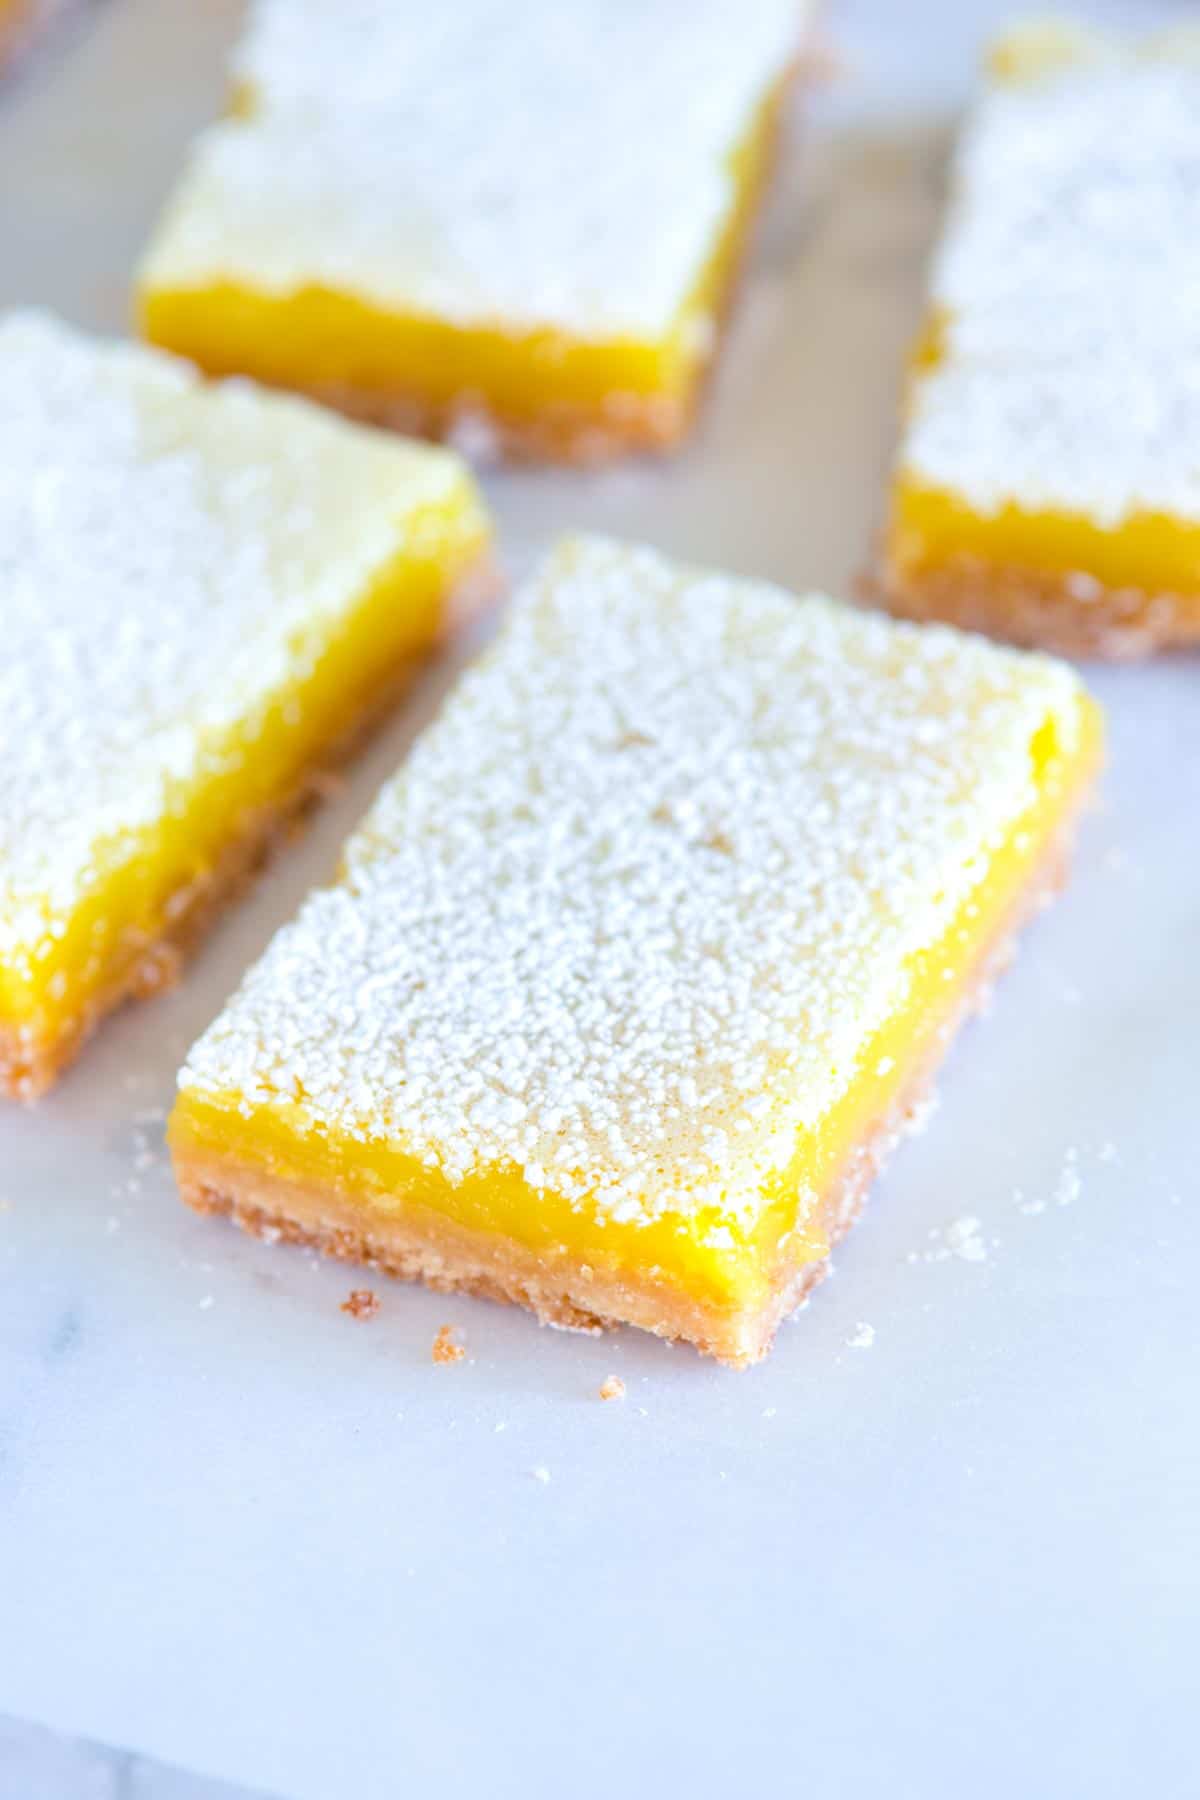 My favorite lemon bars recipe! These classic lemon bars have a crisp shortbread crust and a creamy delicious tart lemon topping. These bars need to be made in your kitchen, ASAP.